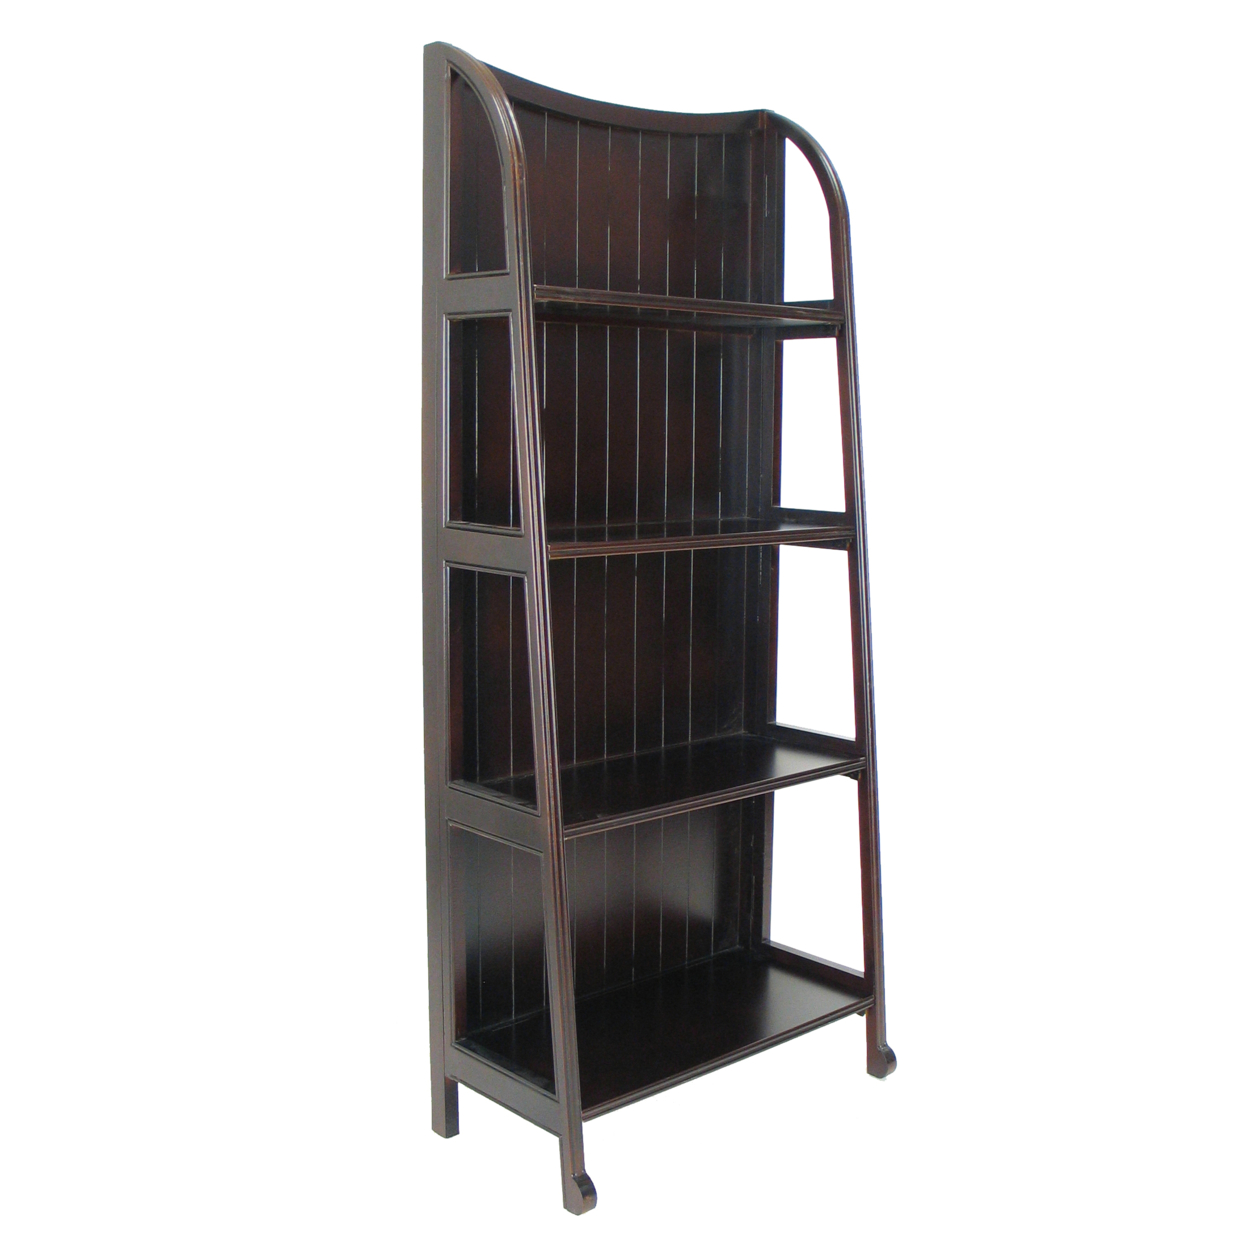 4 Tier Foldable Shelf Display Stand With Plank Style Back, Brown- Saltoro Sherpi